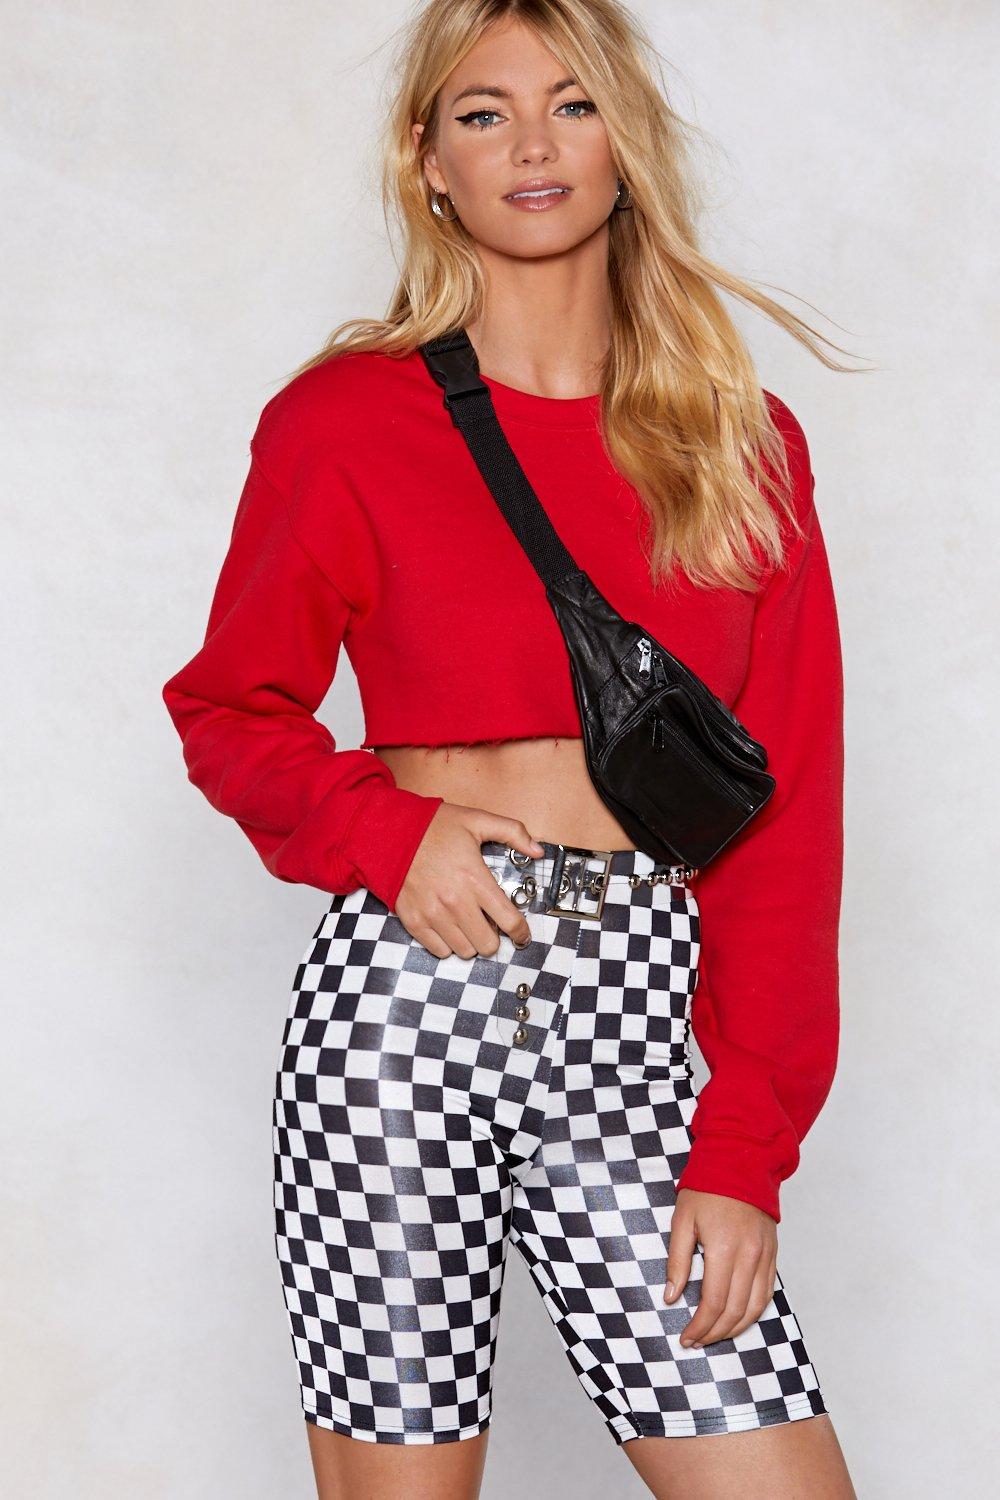 black and white checkered cycling shorts